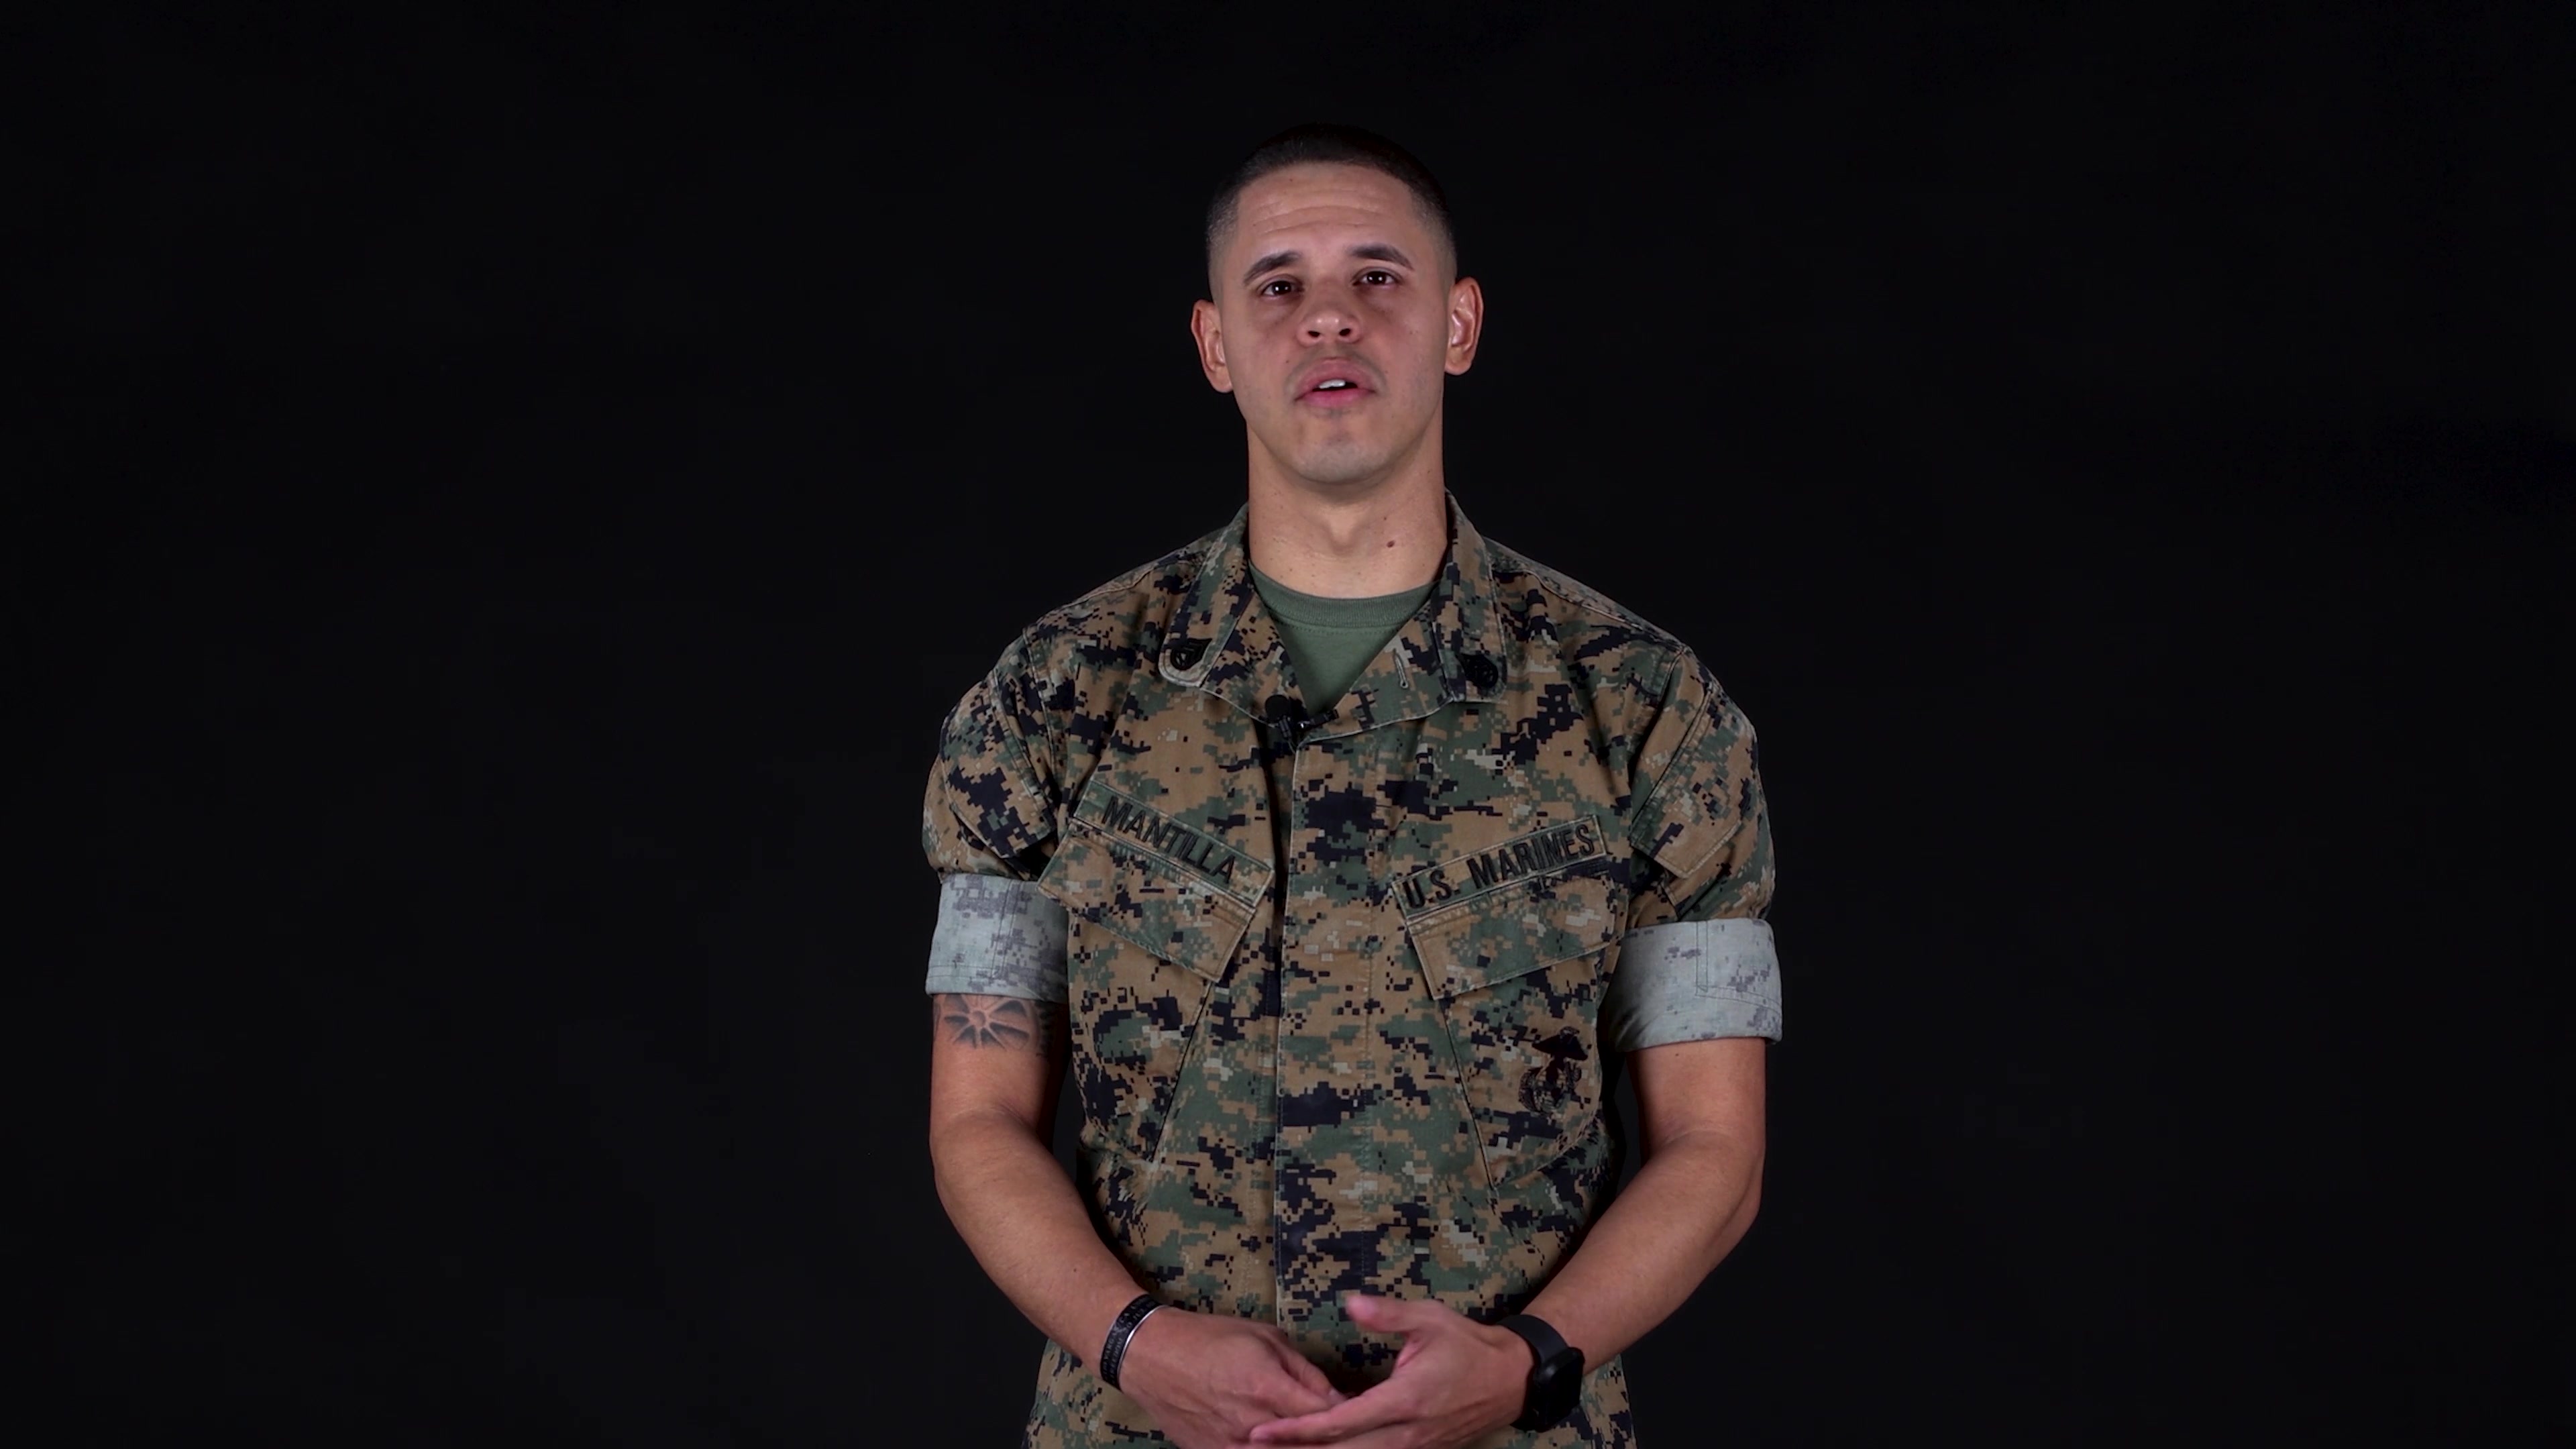 U.S. Marine Corps Staff Sgt. David Mantilla, patrol chief for Security Battalion, Marine Corps Base Quantico, talks about his struggles and how he became a Staff Sergeant of Marines. (U.S. Marine Corps video by Lance Cpl. Eric Huynh)